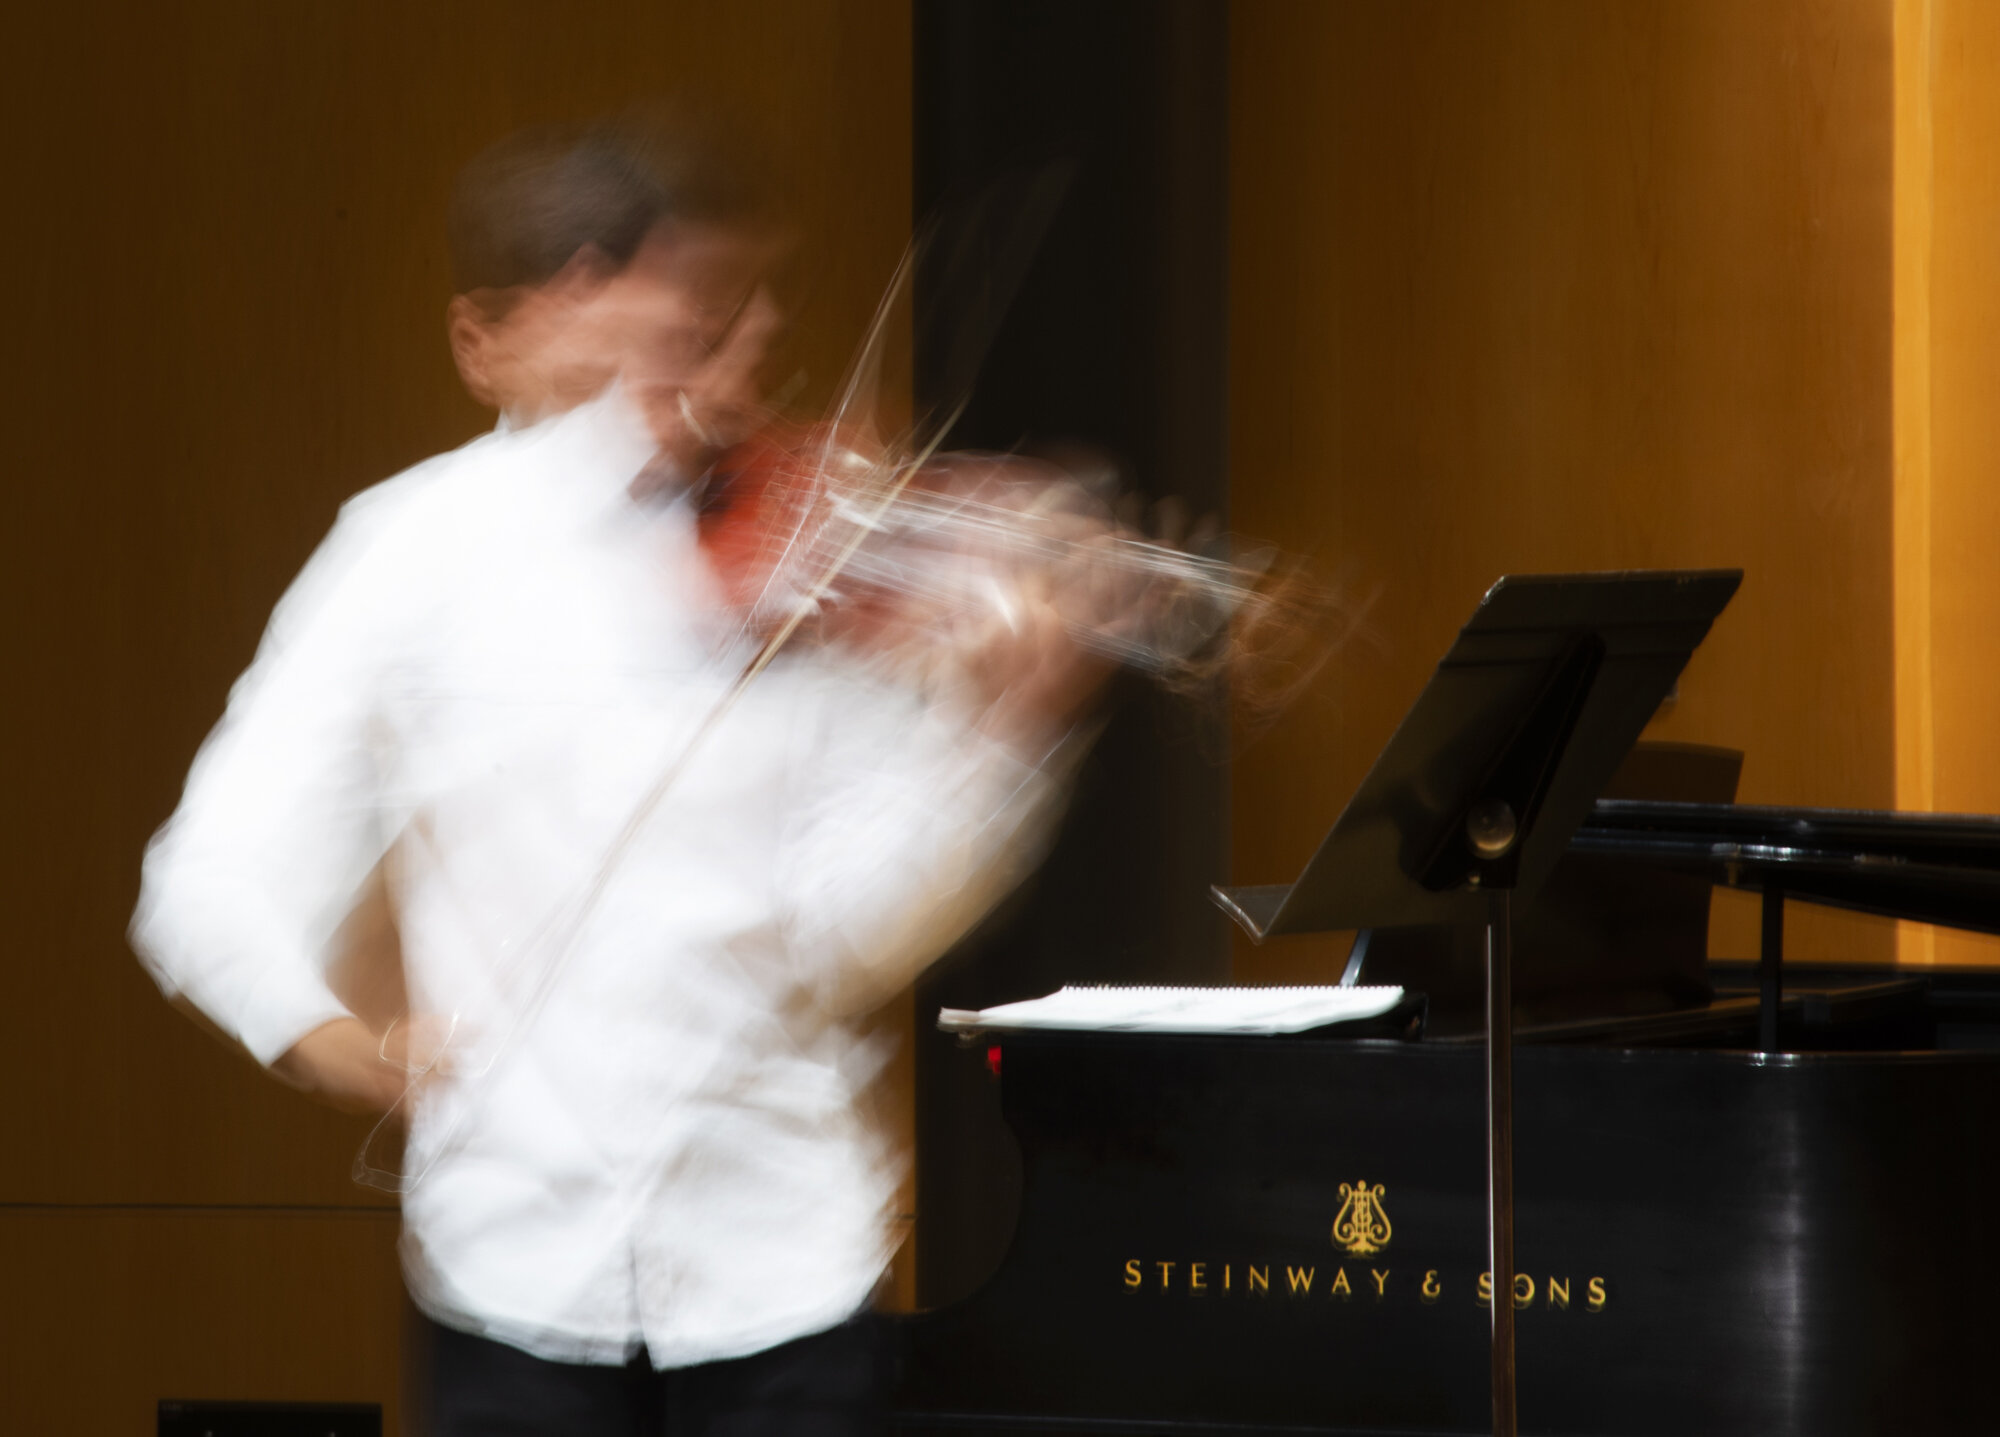  “National Orchestral Institute + Festival.” Photo by David Andrews, property of The University of Maryland, 2019. All Rights Reserved. 